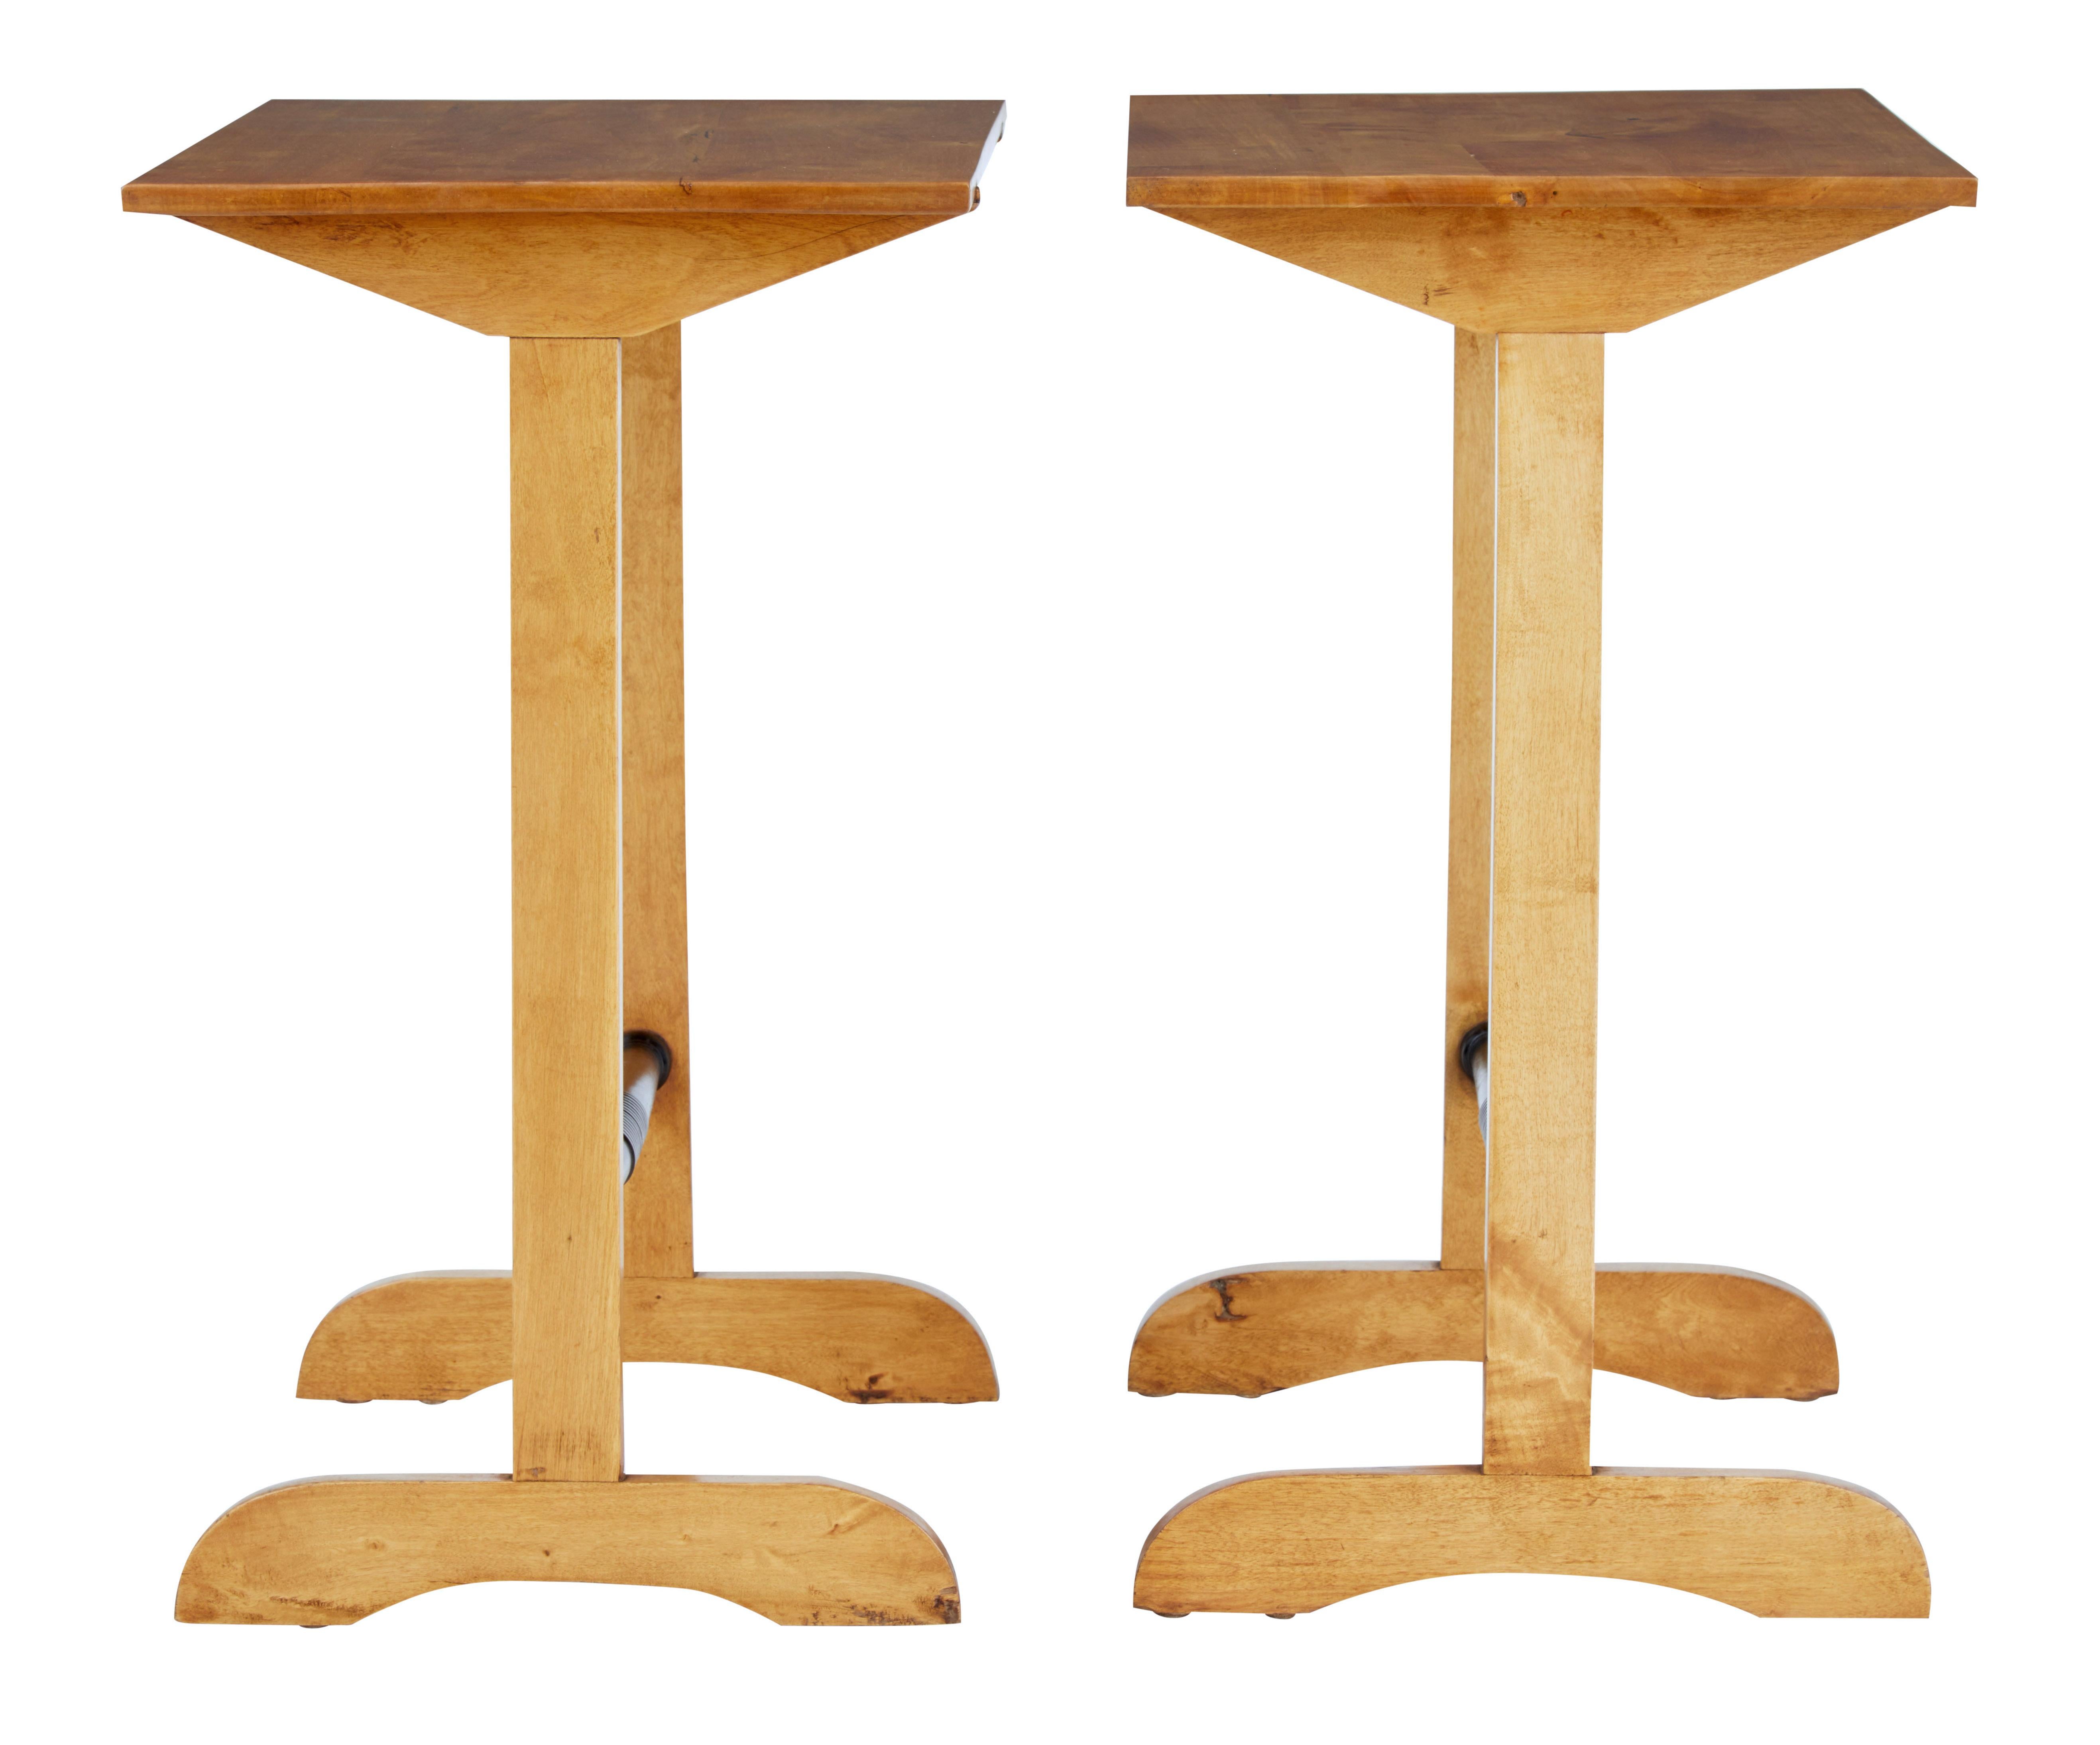 Pair of early 20th century Swedish birch side tables, circa 1920.

Unusual pair of birch tables that have potential multiple uses, but we think they would work well as a pair of lamp tables. Recently restored and back to their rich birch color.